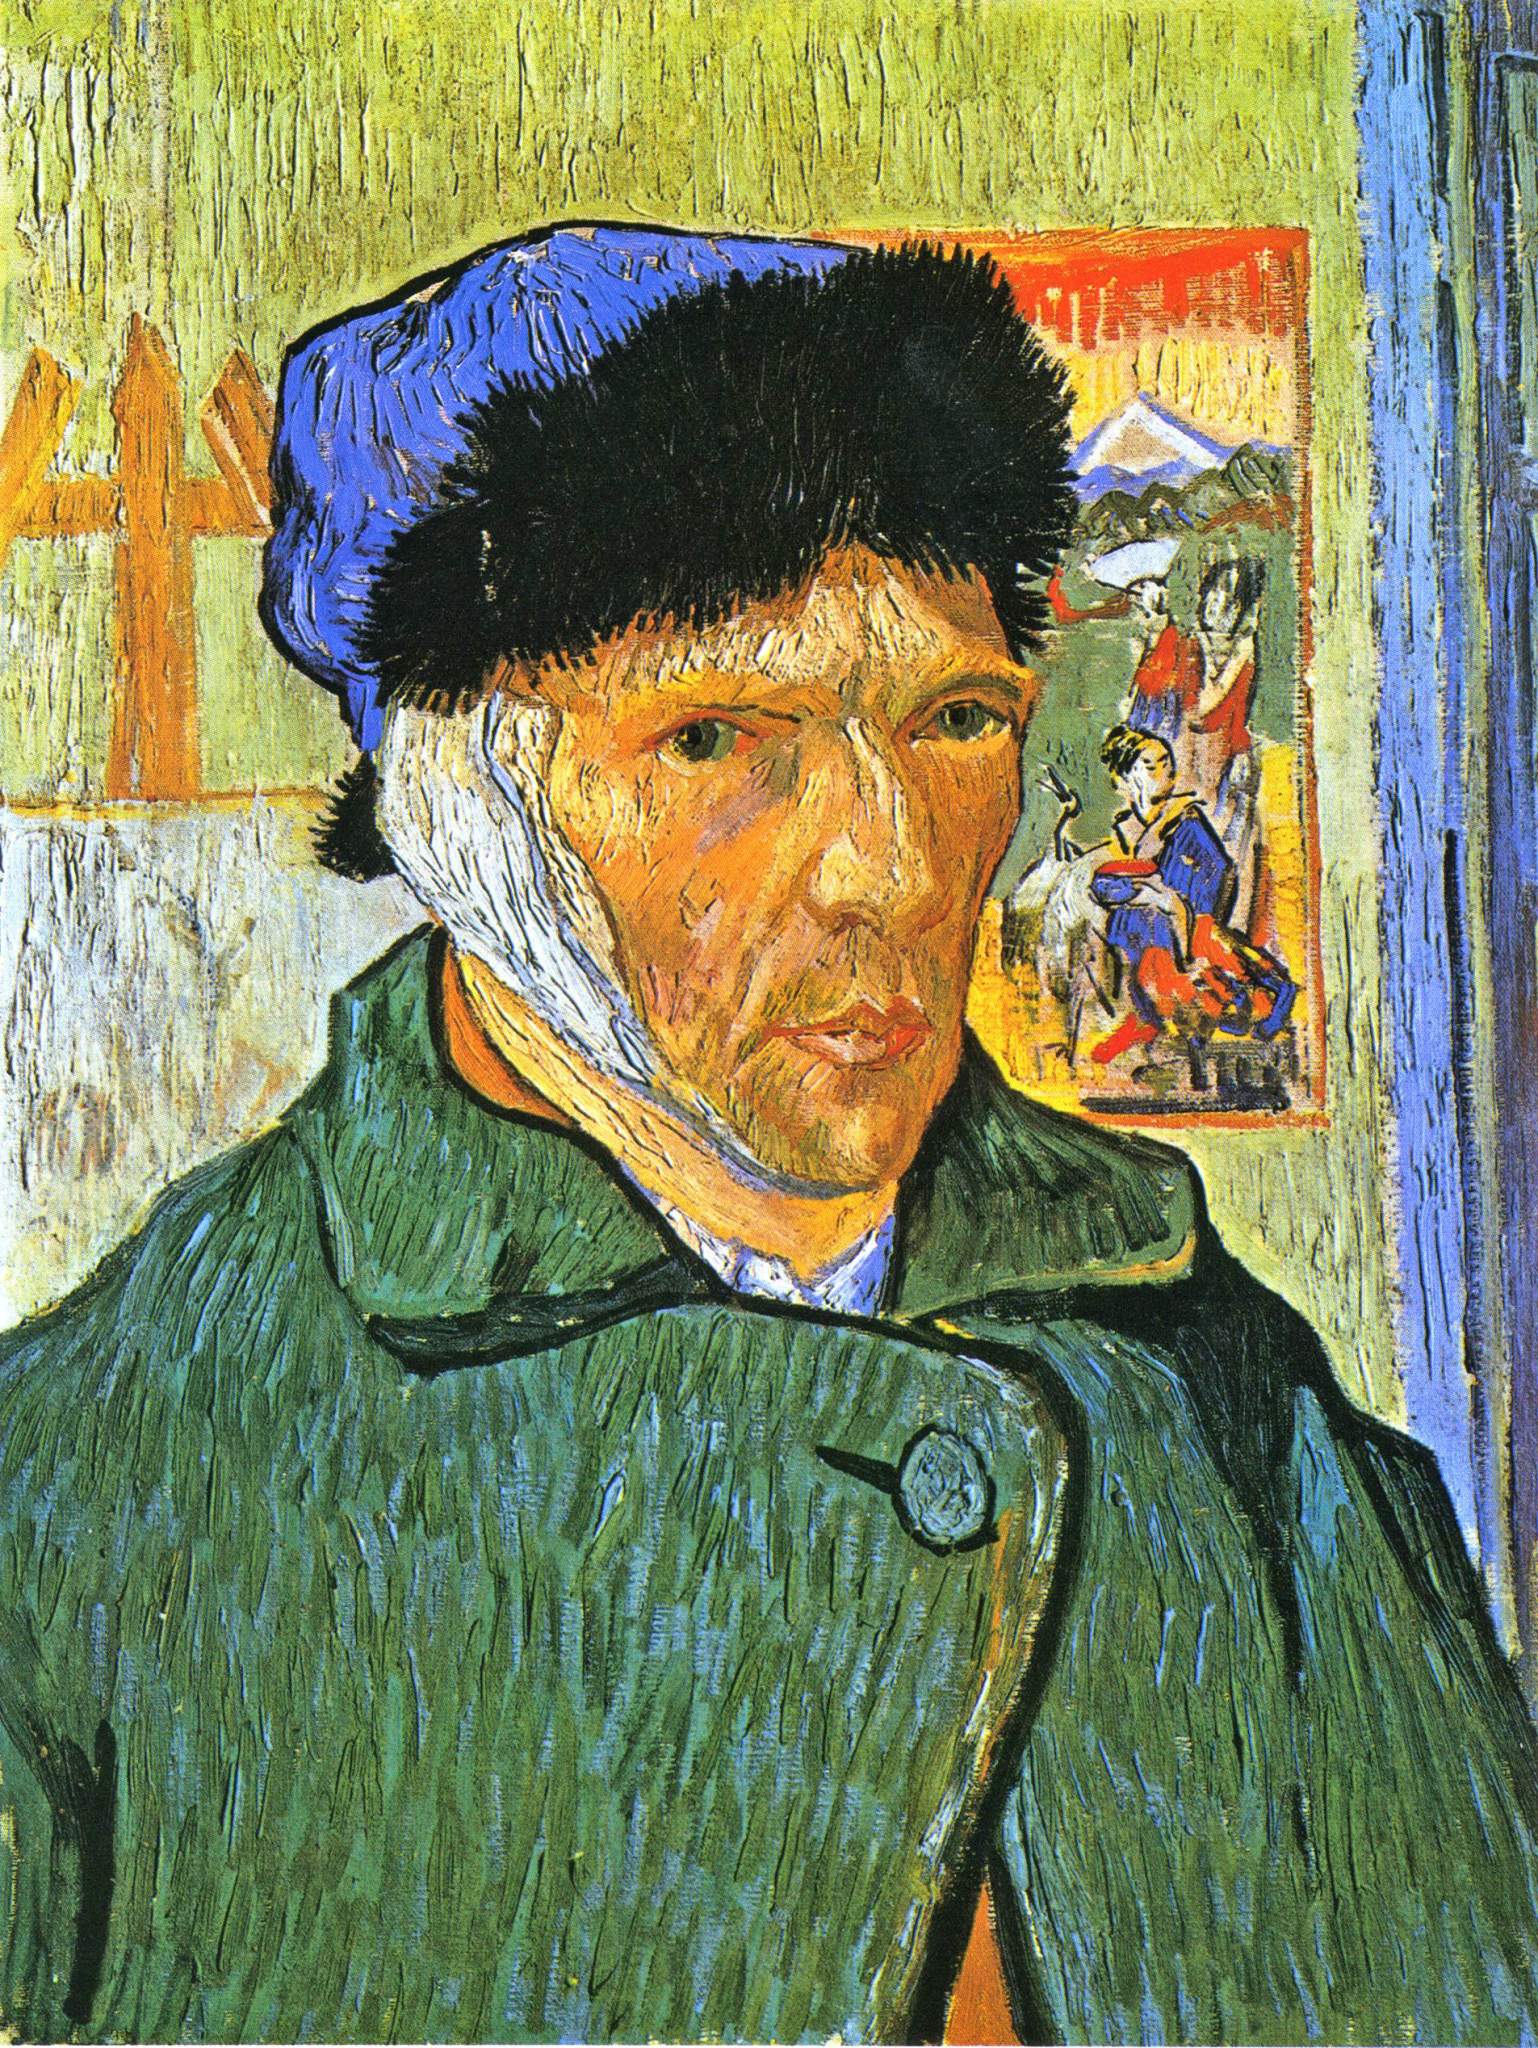 Courtauld 01-1 Vincent Van Gogh - Self-Portrait with Bandaged Ear The Courtauld Institute of Art Gallery is housed in Londons Somerset House, founded in 1931 by the textile magnate Samuel Courtauld. 1. Vincent van Gogh - Self-Portrait with Bandaged Ear. Arles, January 1889, 61 x 50 cm. On the night of December 23, 1888, Vincent van Gogh was drunk and upset that his friend Paul Gauguin was planning to leave. He waved a knife in Gauguin's face, then cut off a piece of his own ear and gave it to a prostitute. Gauguin quickly left for Paris, and van Gogh went to a hospital.  A week later, Vincent looked in the mirror and saw a calm man with an unflinching gaze, dressed in a heavy coat (painted with thick, vertical strokes of blue and green) and fur-lined hat, and a slightly stained bandage over his ear.